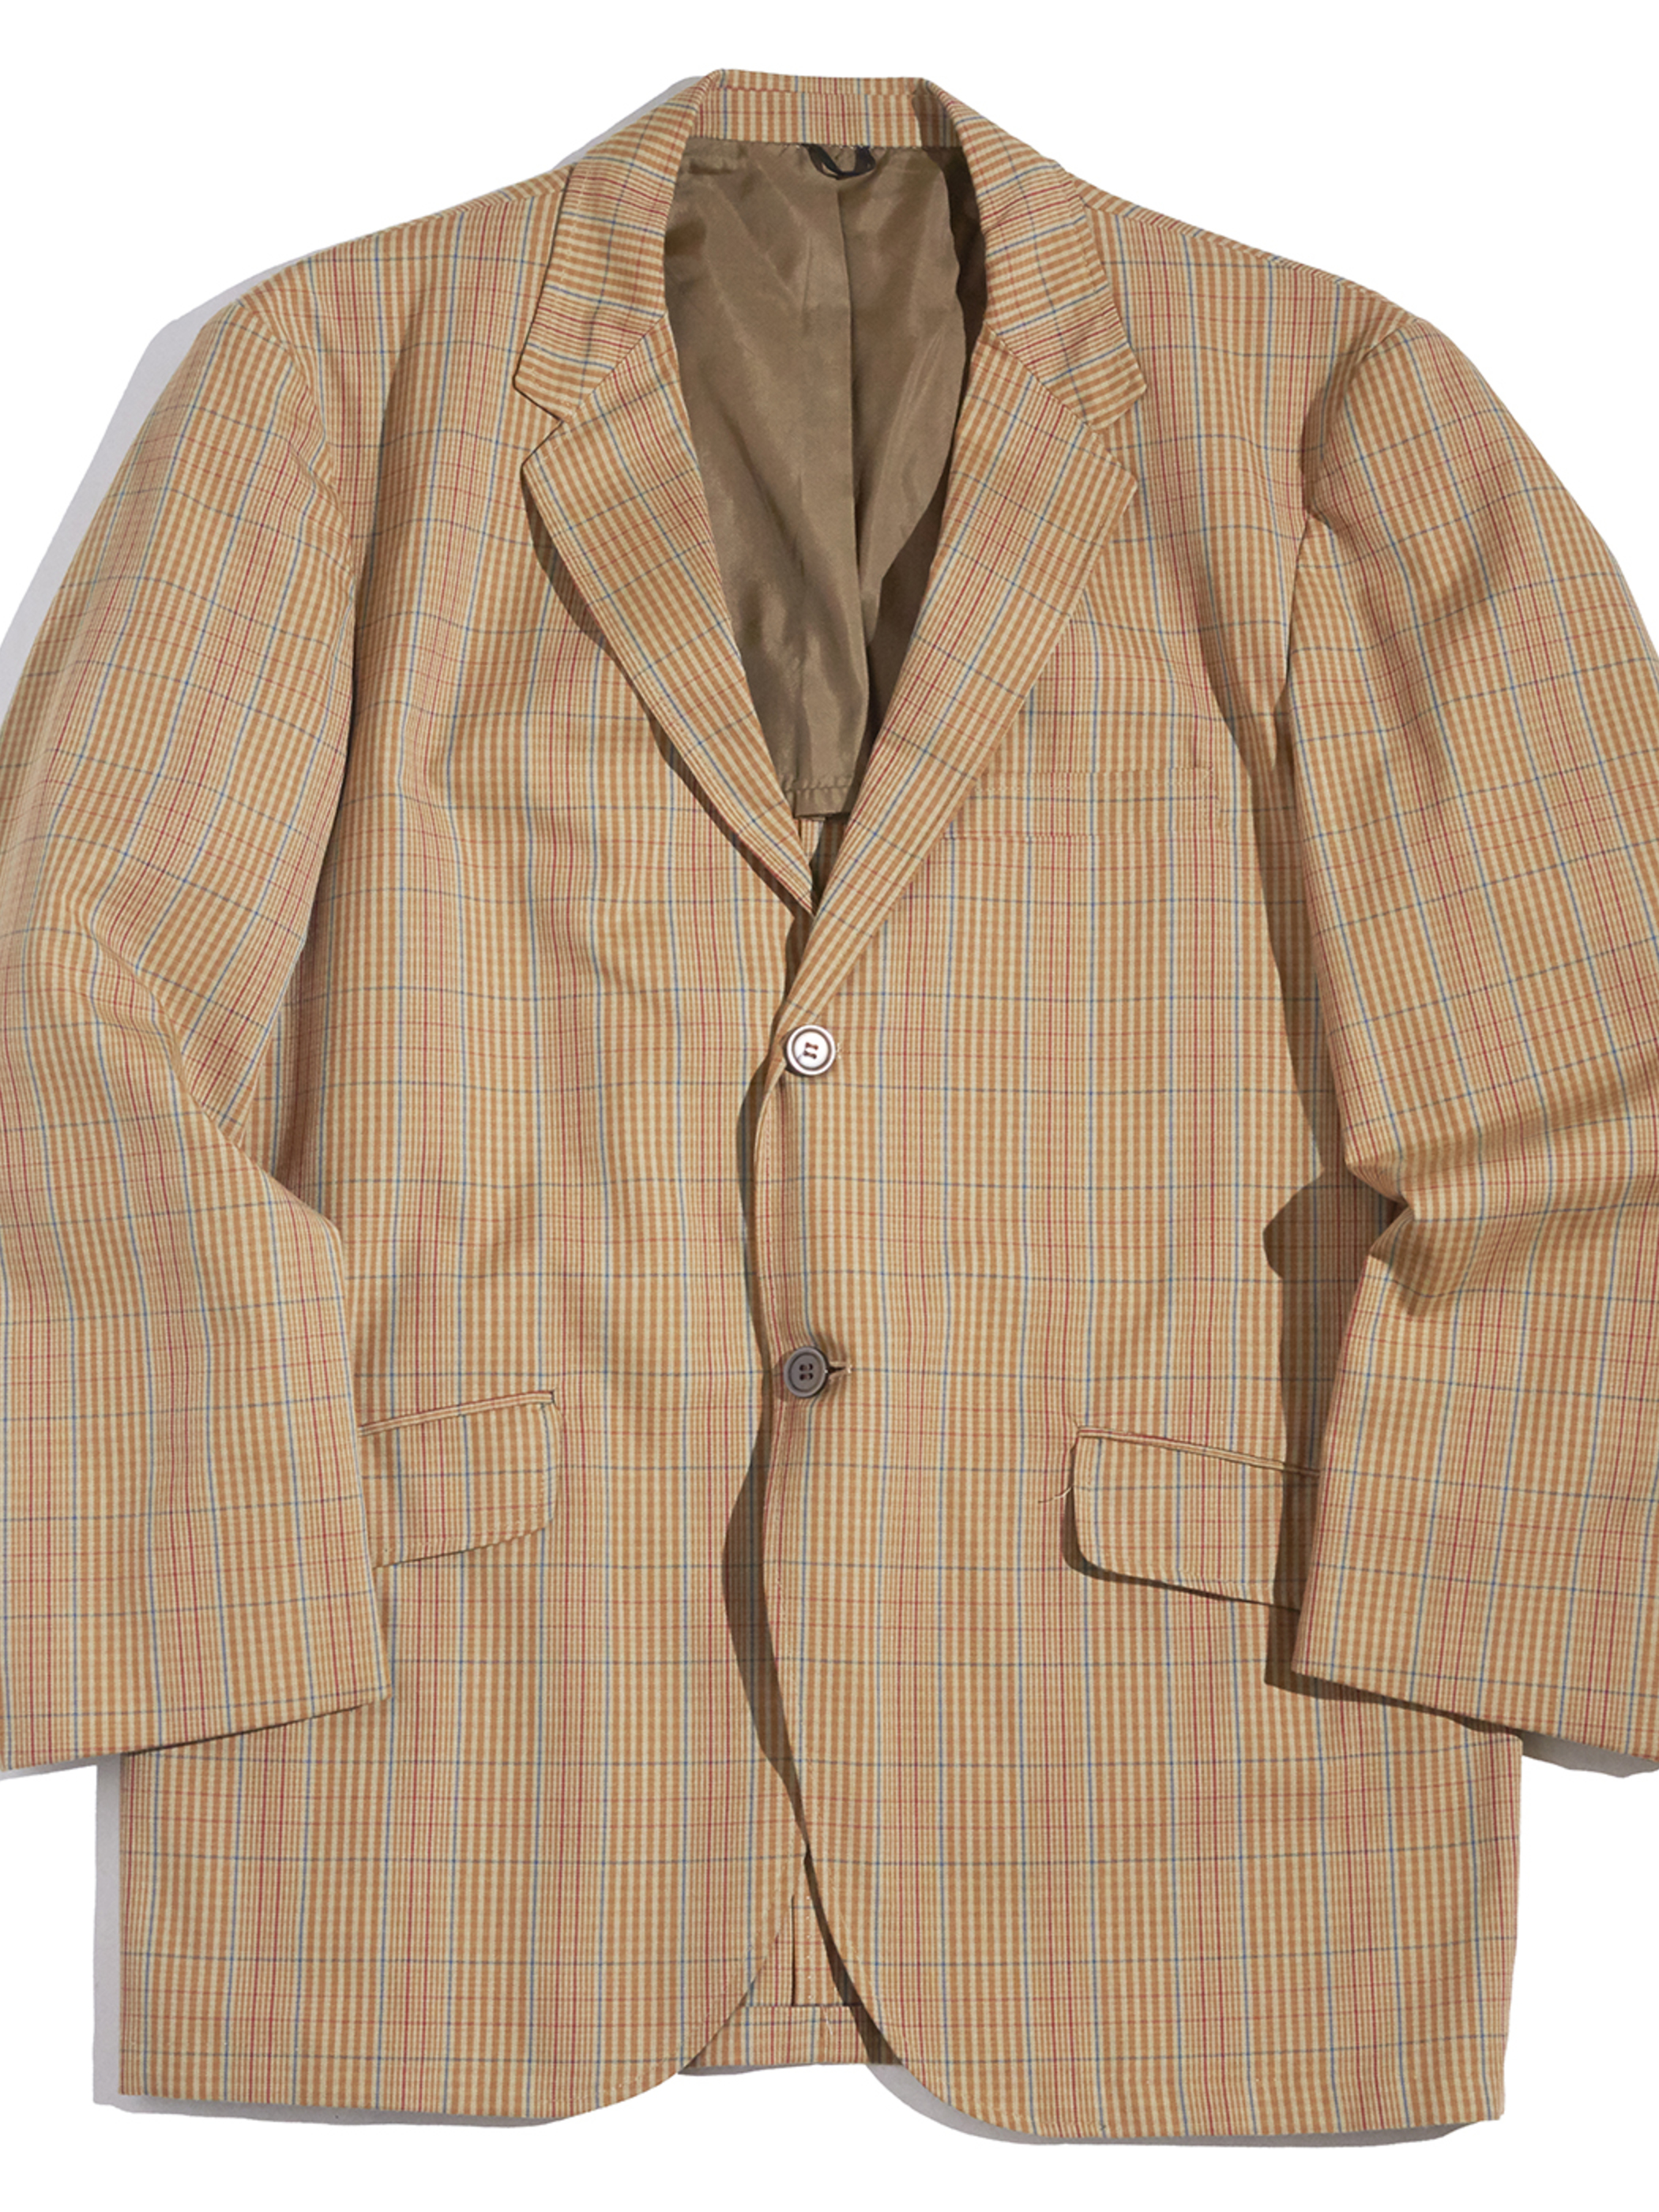 1960s "SEARS" check tailored jacket -BROWN-